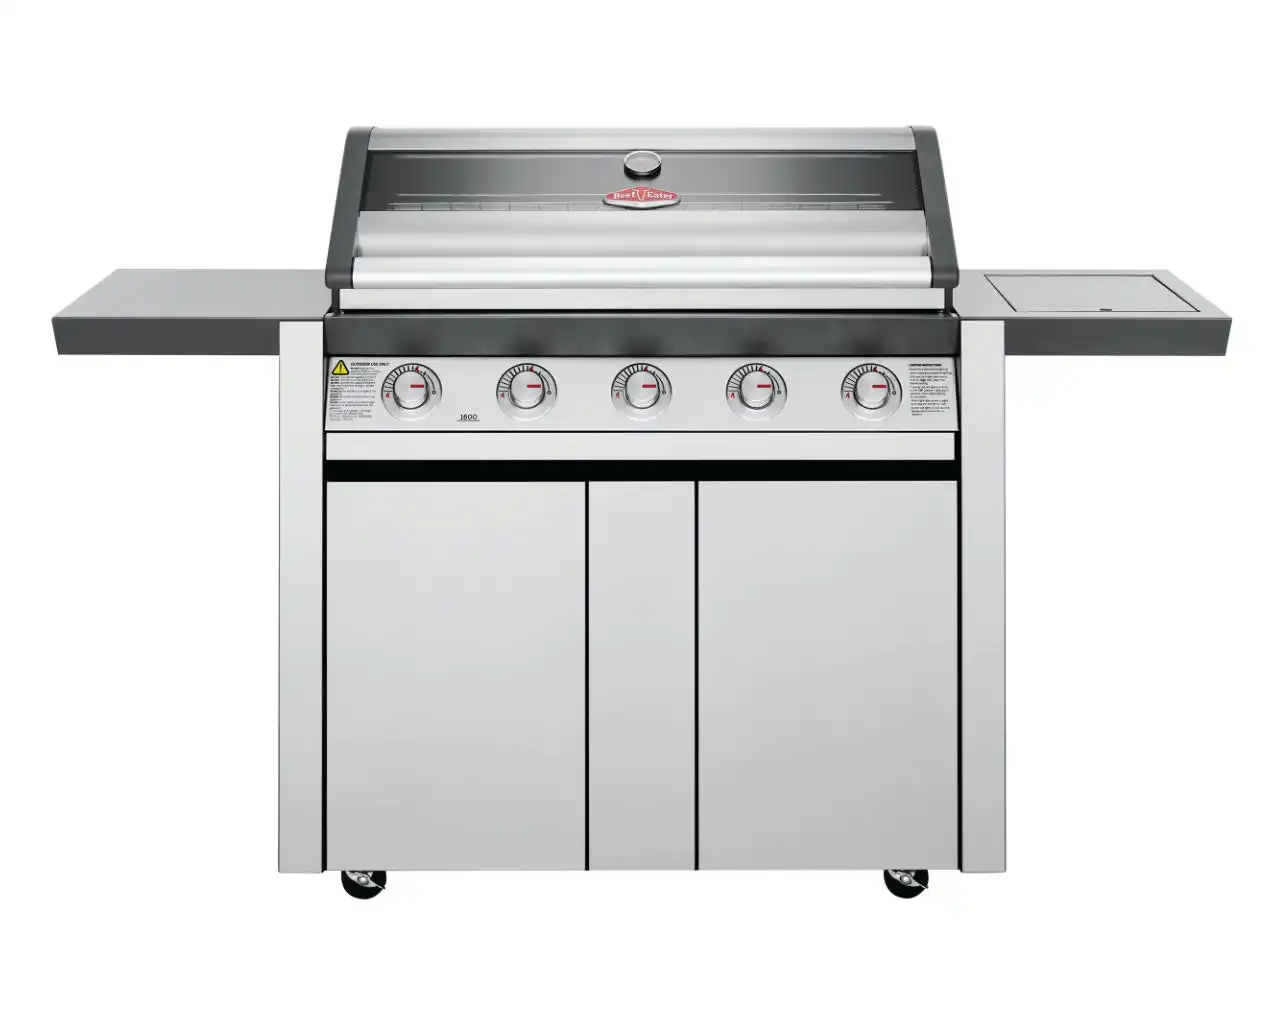 Beefeater 1600 Series - 5 Burner Stainless Steel BBQ With Side Burner (Silver)